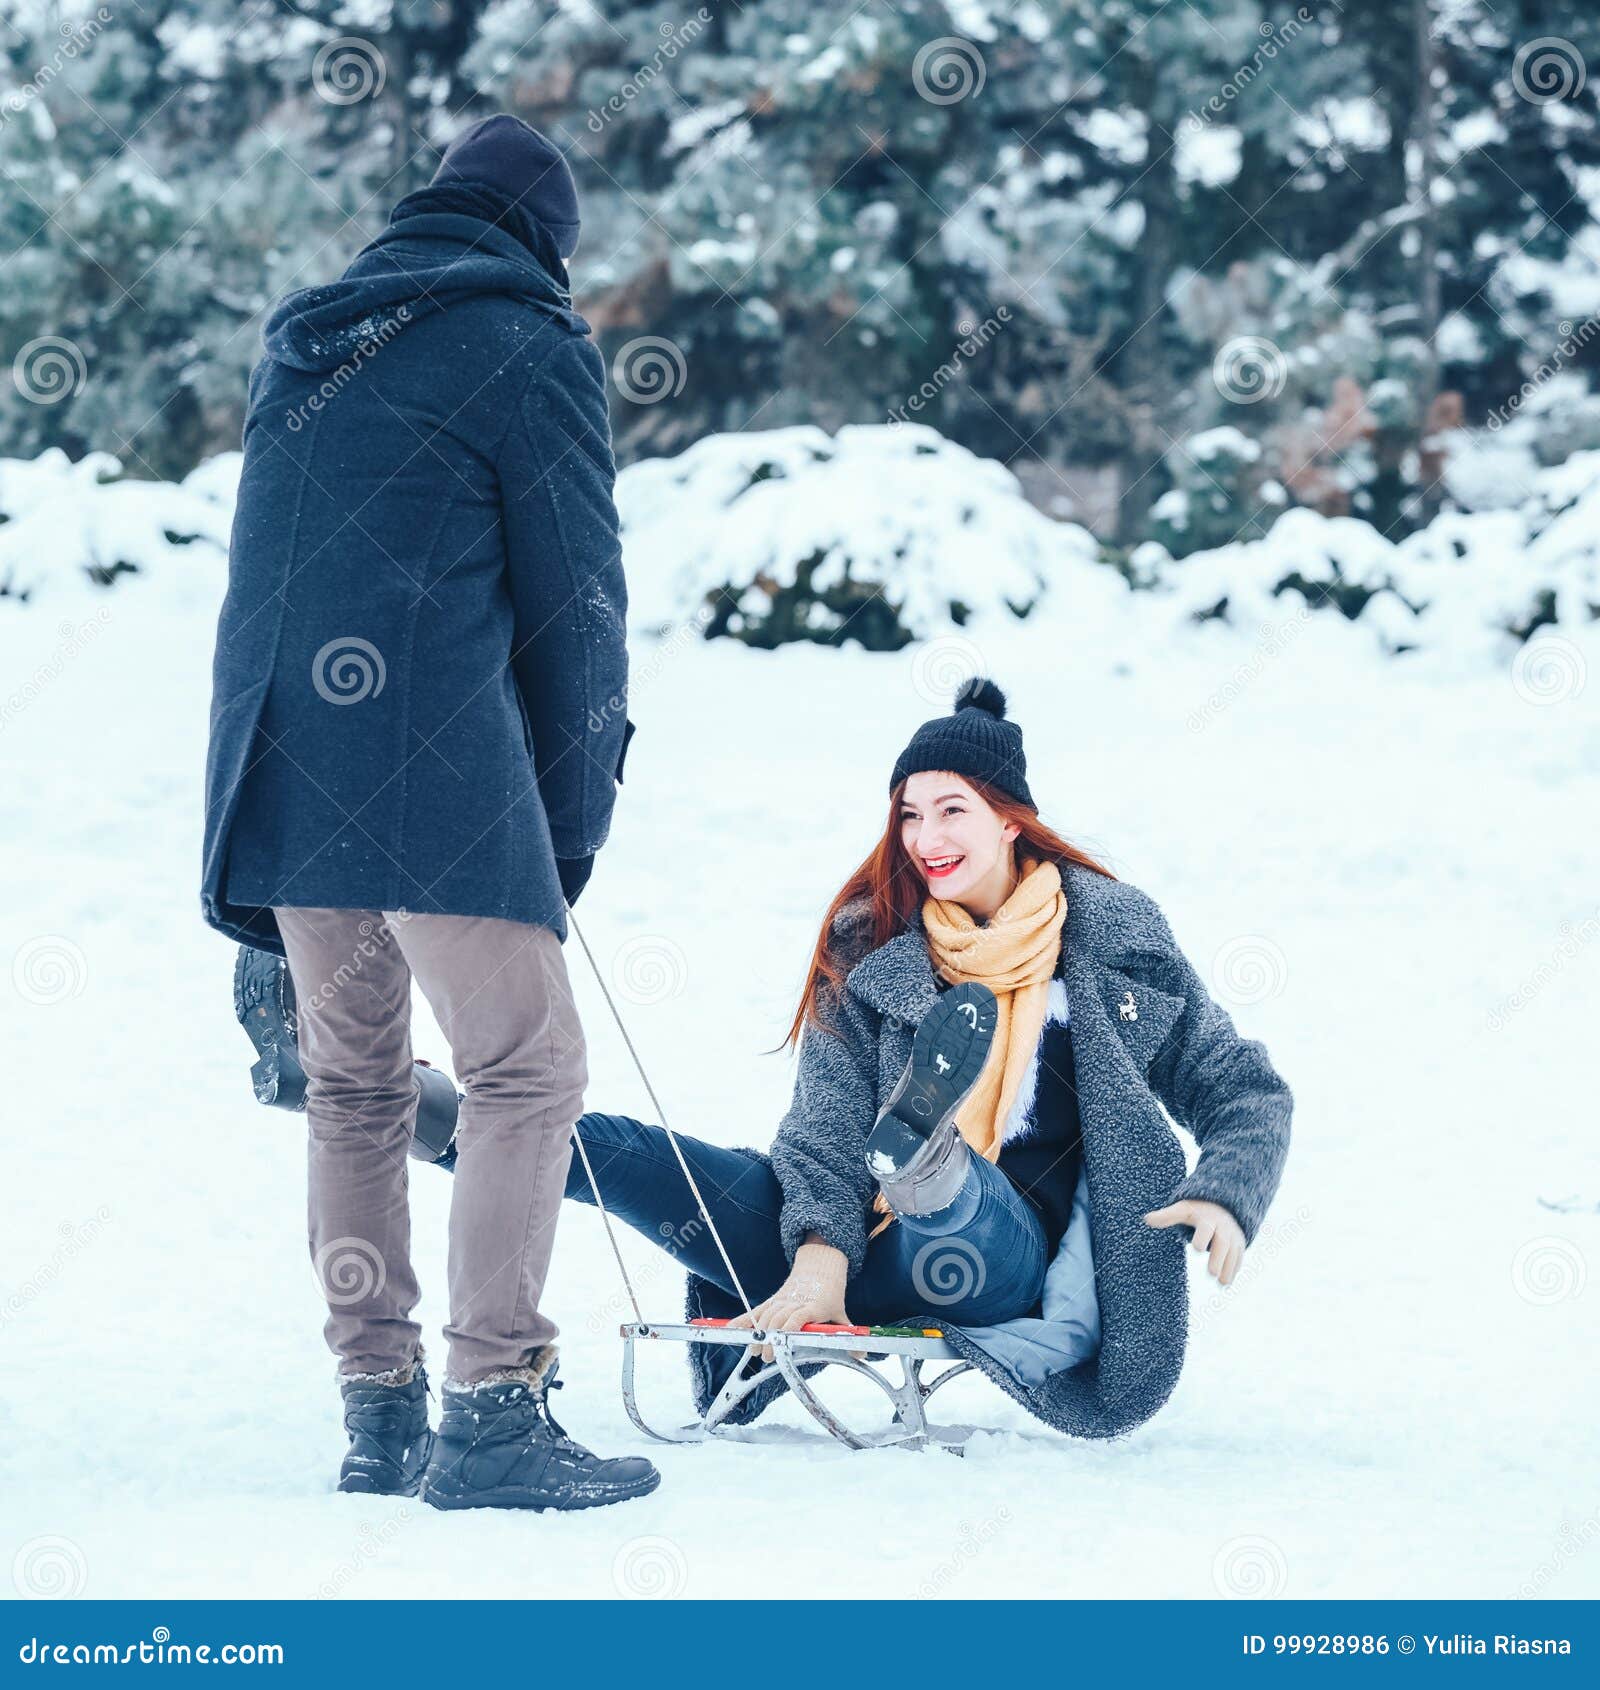 Young Couple In Love Enjoying A Winter Vacation And Having